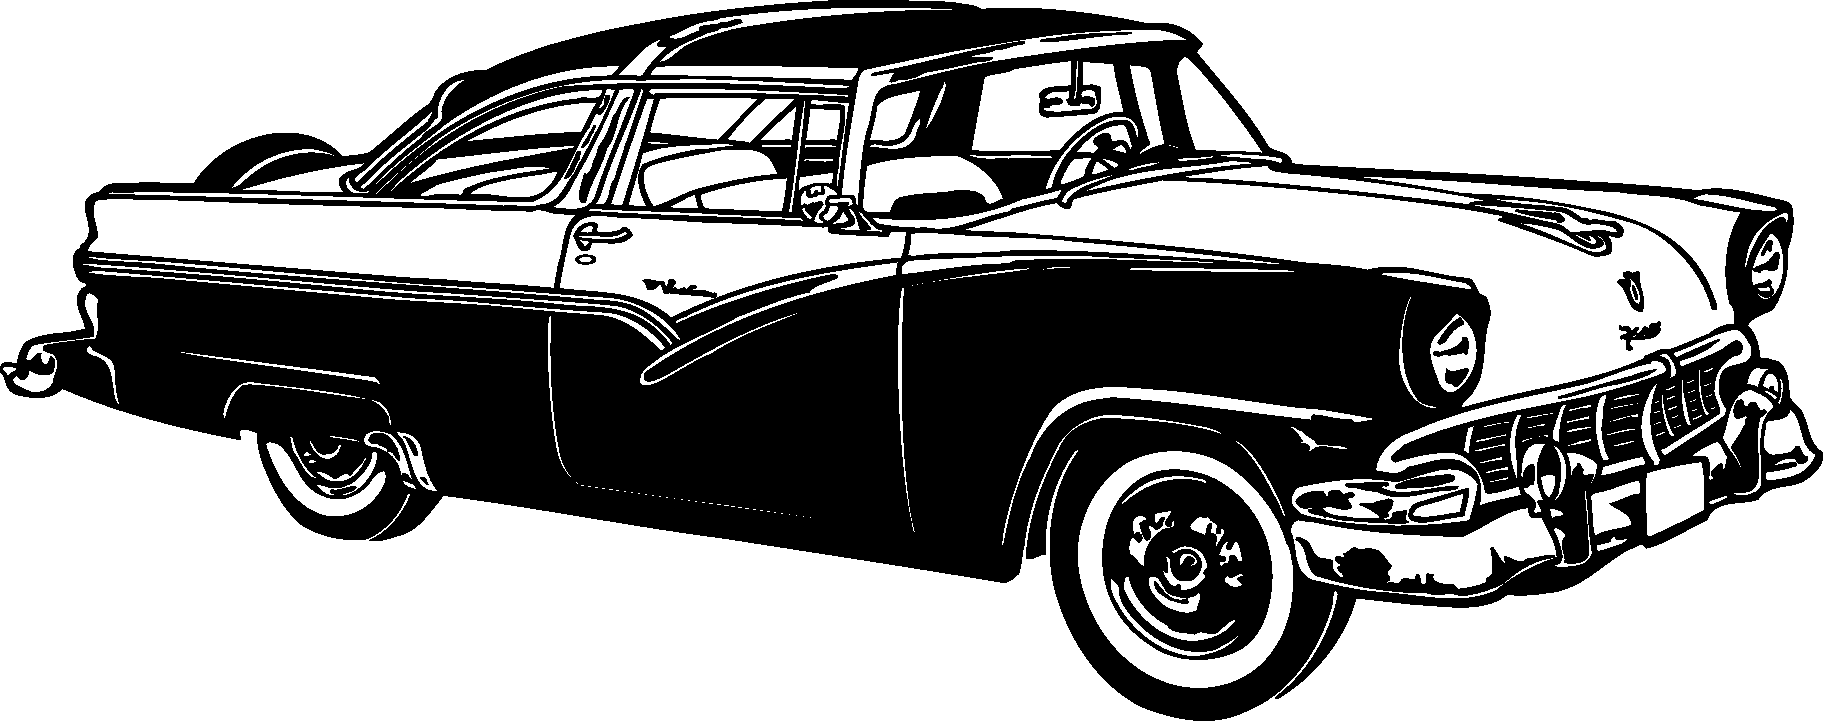 Transport, Classic Cars Silhouettes png